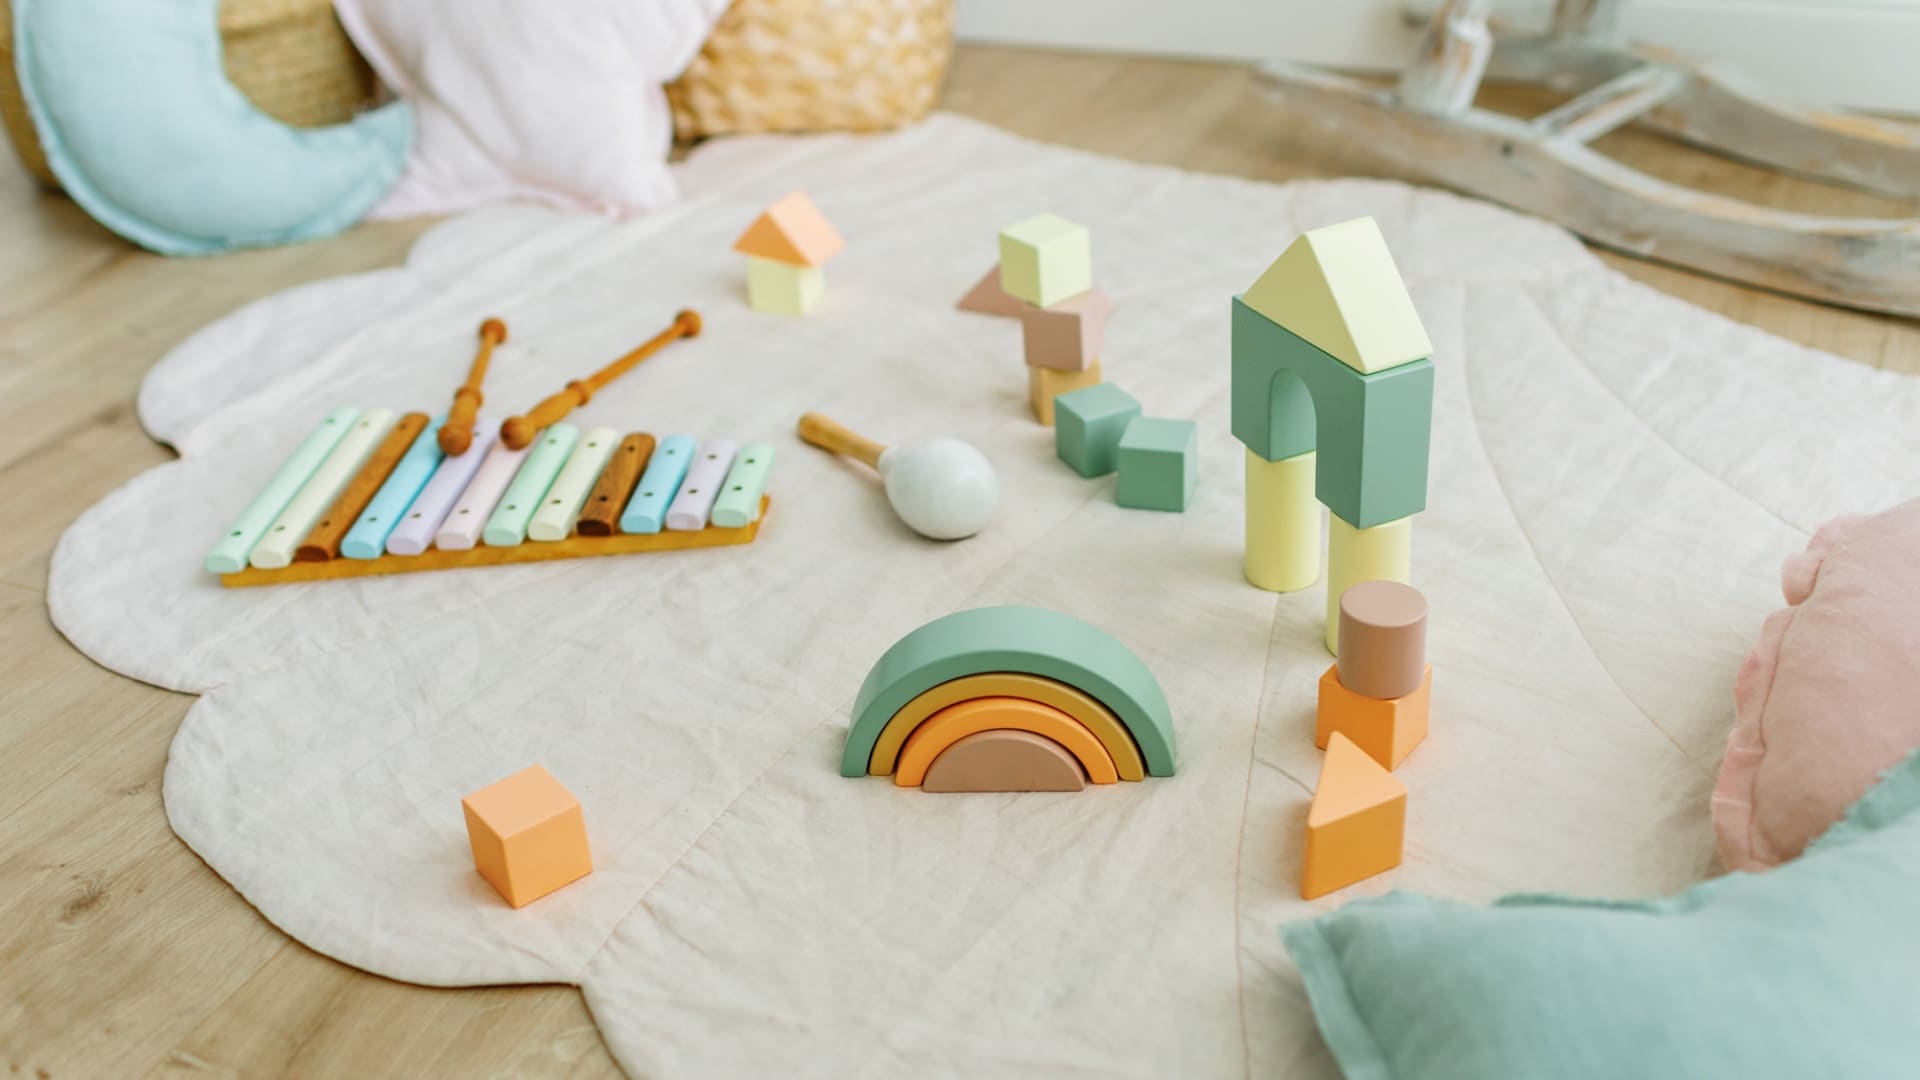 Wooden, pastel coloured children’s toys spread out on playmat in playroom.